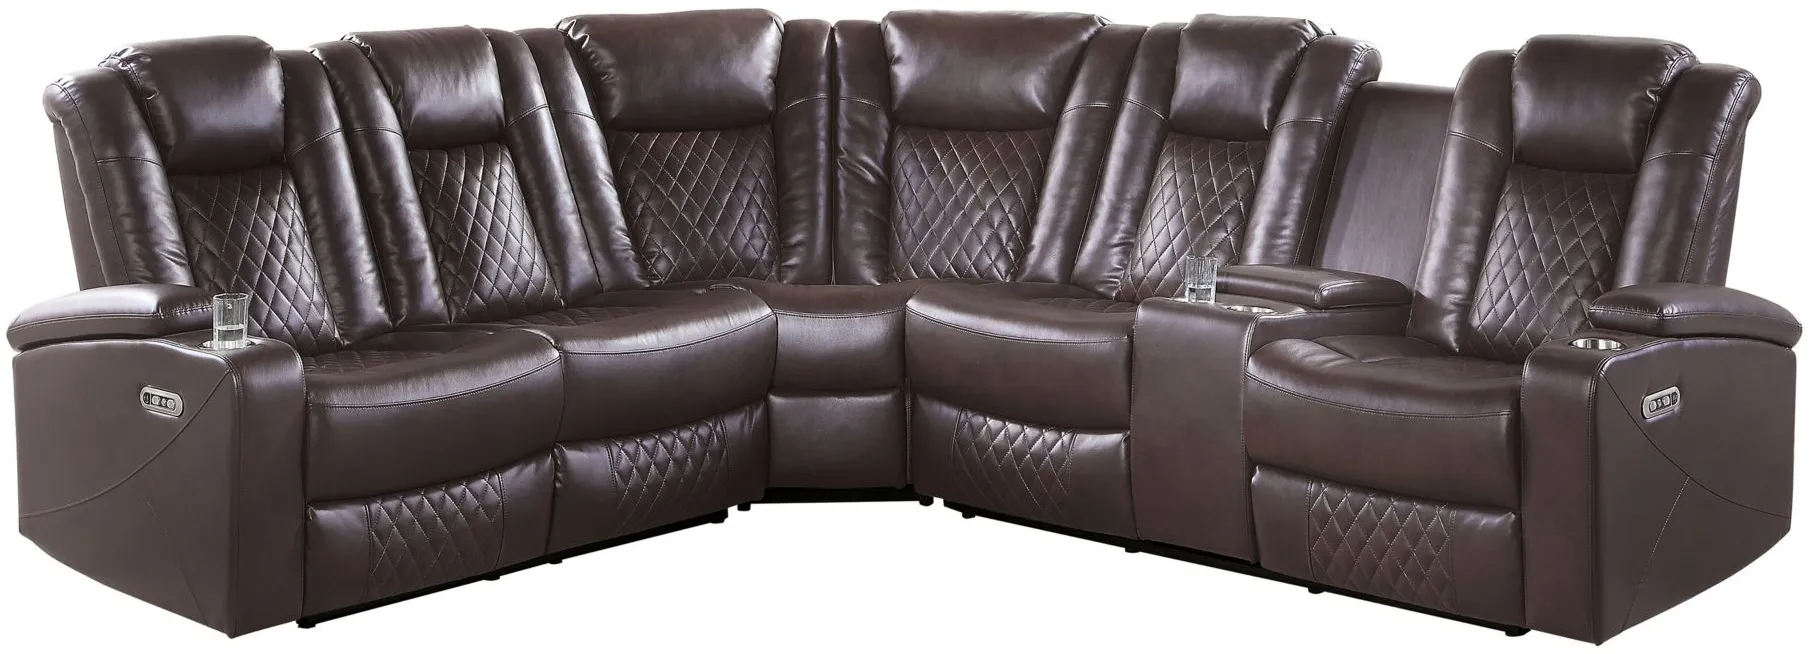 Orina 3-pc. Reclining Sectional with Power headrests in Dark Brown by Homelegance